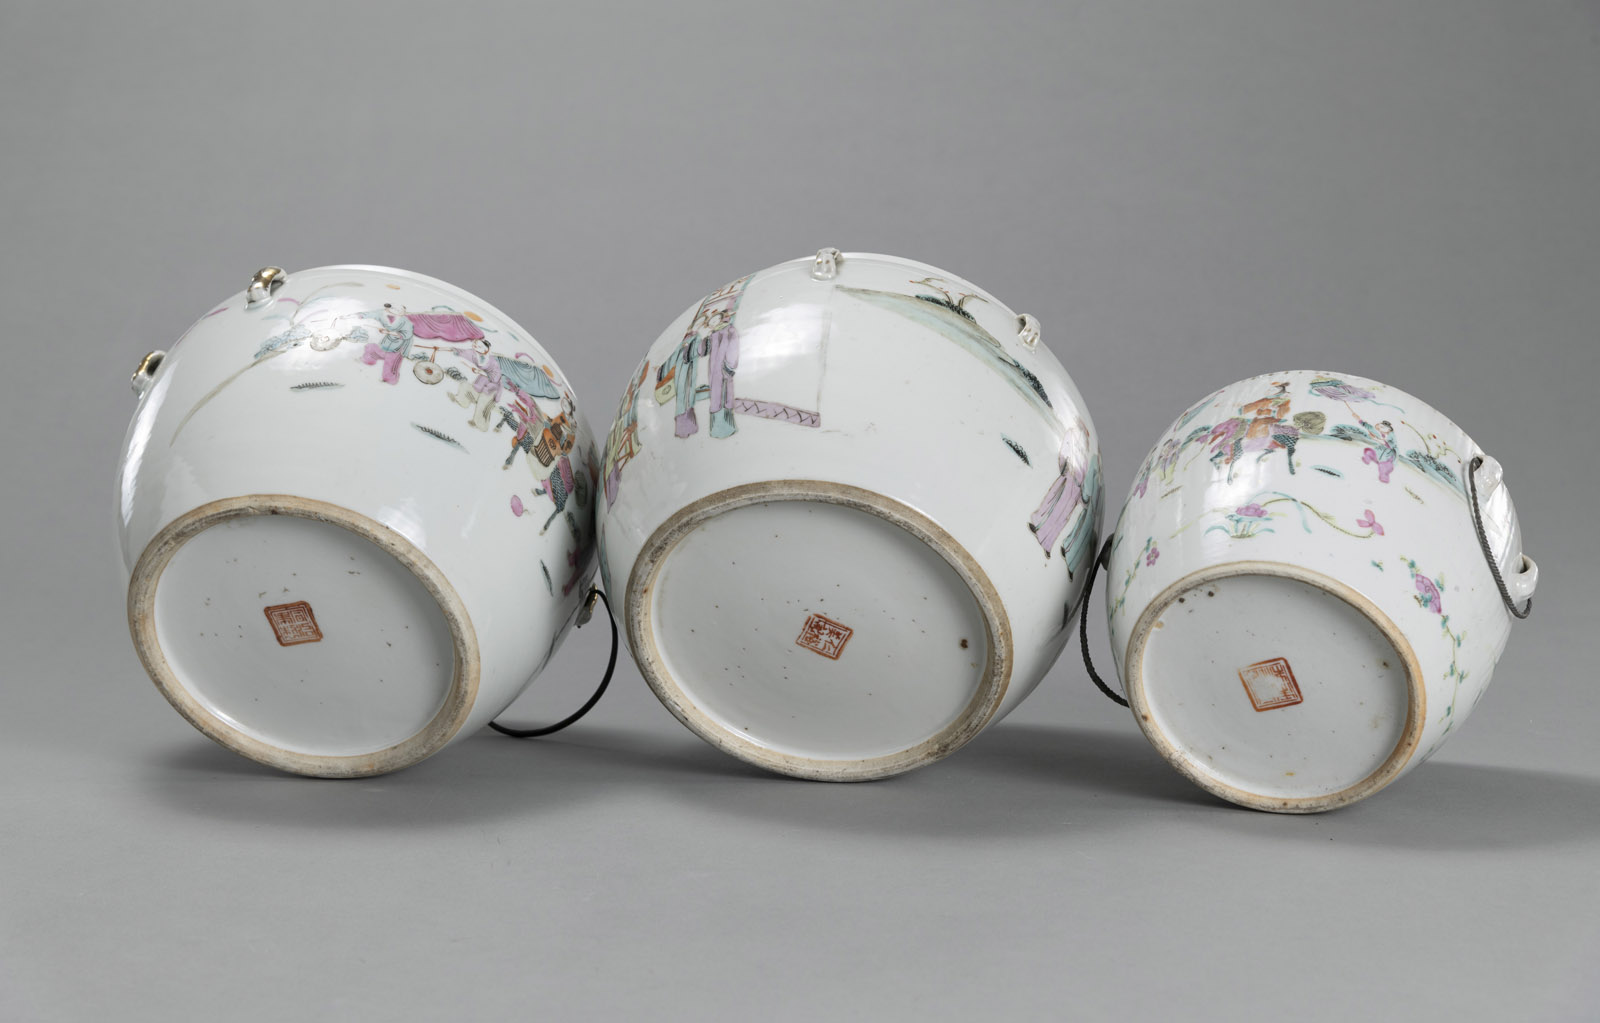 SIX 'FAMILLE ROSE' PORCELAIN JARS (ONE WITH COVER) WITH FIGURAL AND FLORAL DECORATION - Image 5 of 5